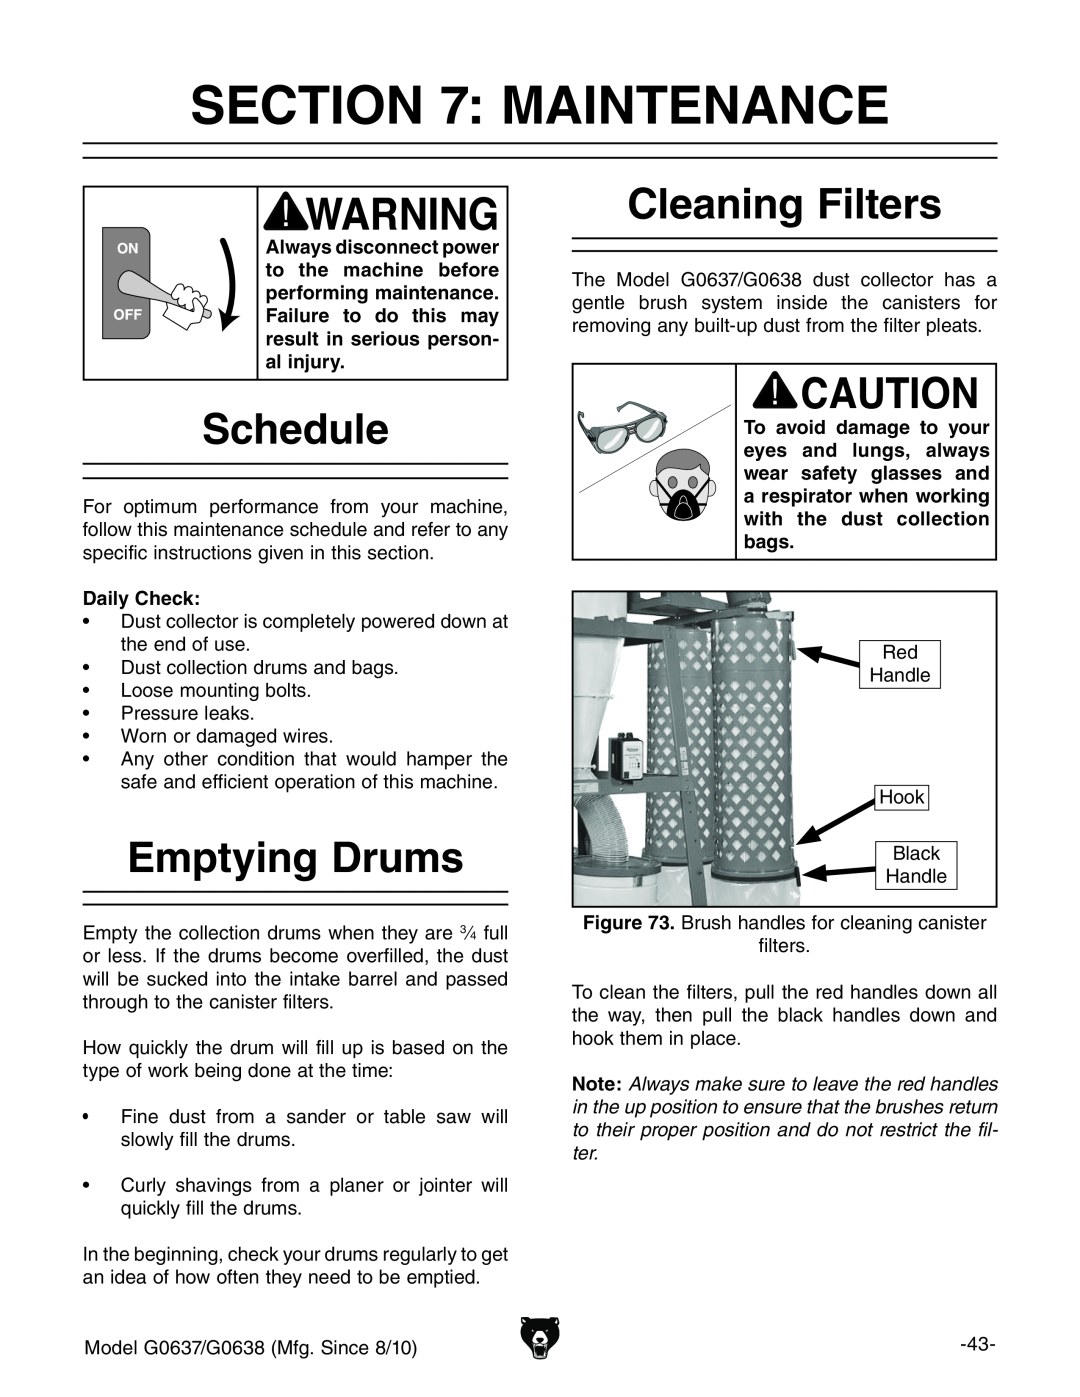 Grizzly G0637 owner manual Maintenance, Schedule, Emptying Drums, Cleaning Filters 